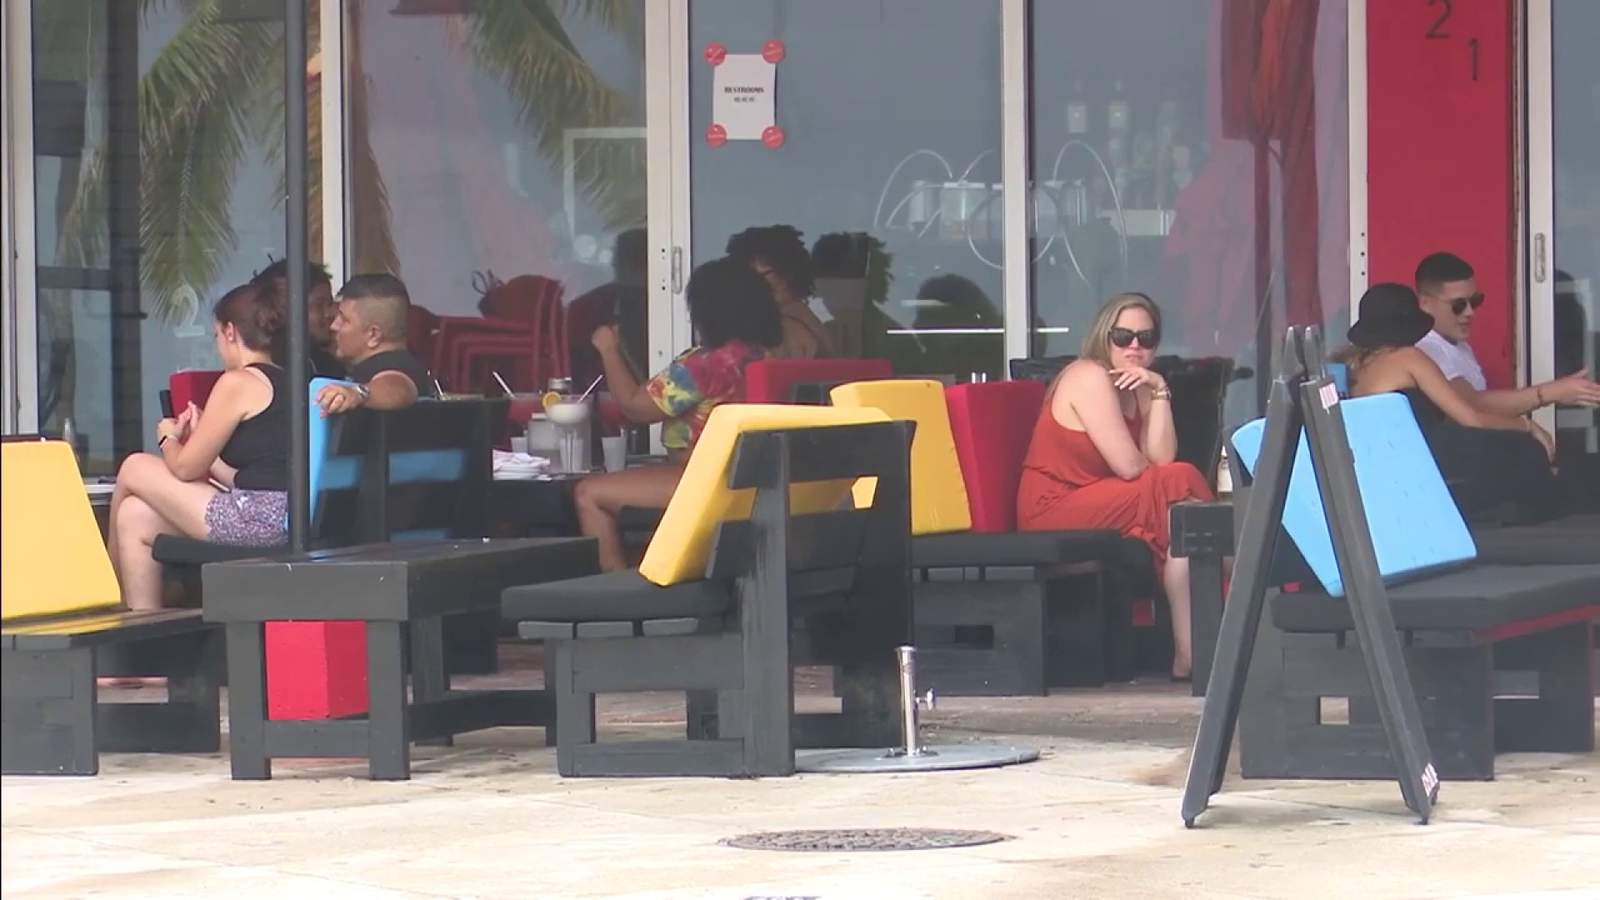 Day after Tropical Storm Isaias in South Florida, residents, tourists out and about